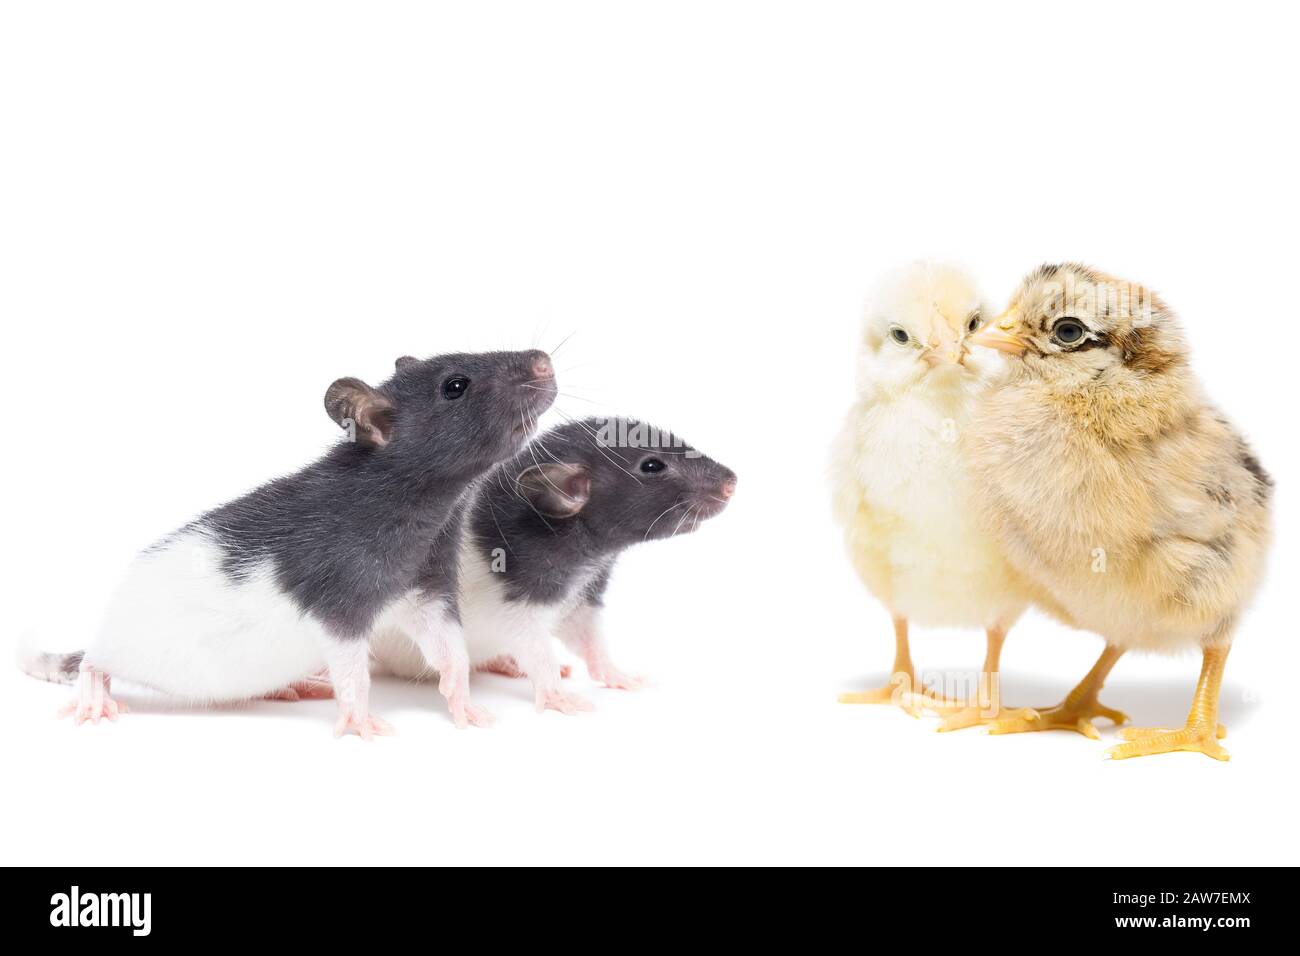 Chickens and a rat on an isolated white background Stock Photo